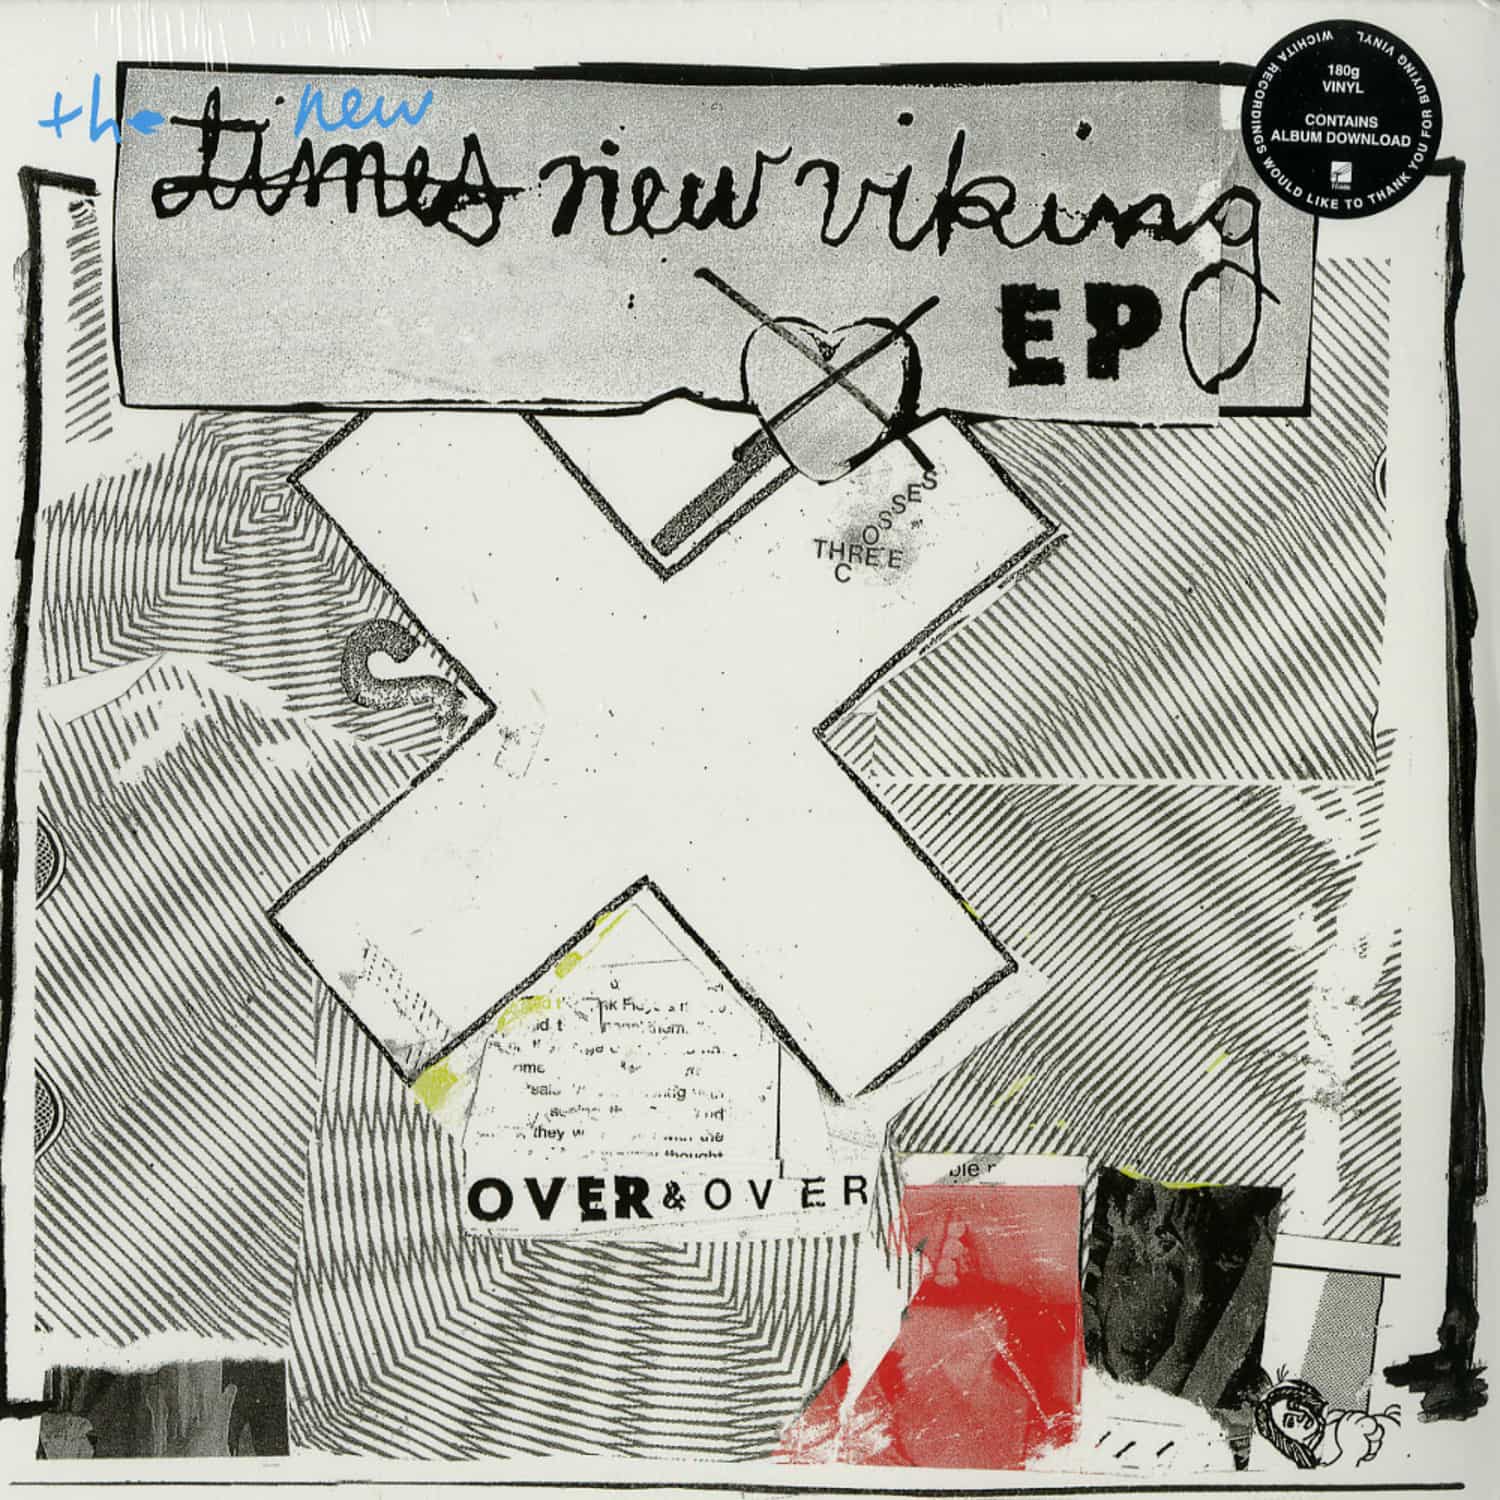 Times New Viking - OVER & OVER 